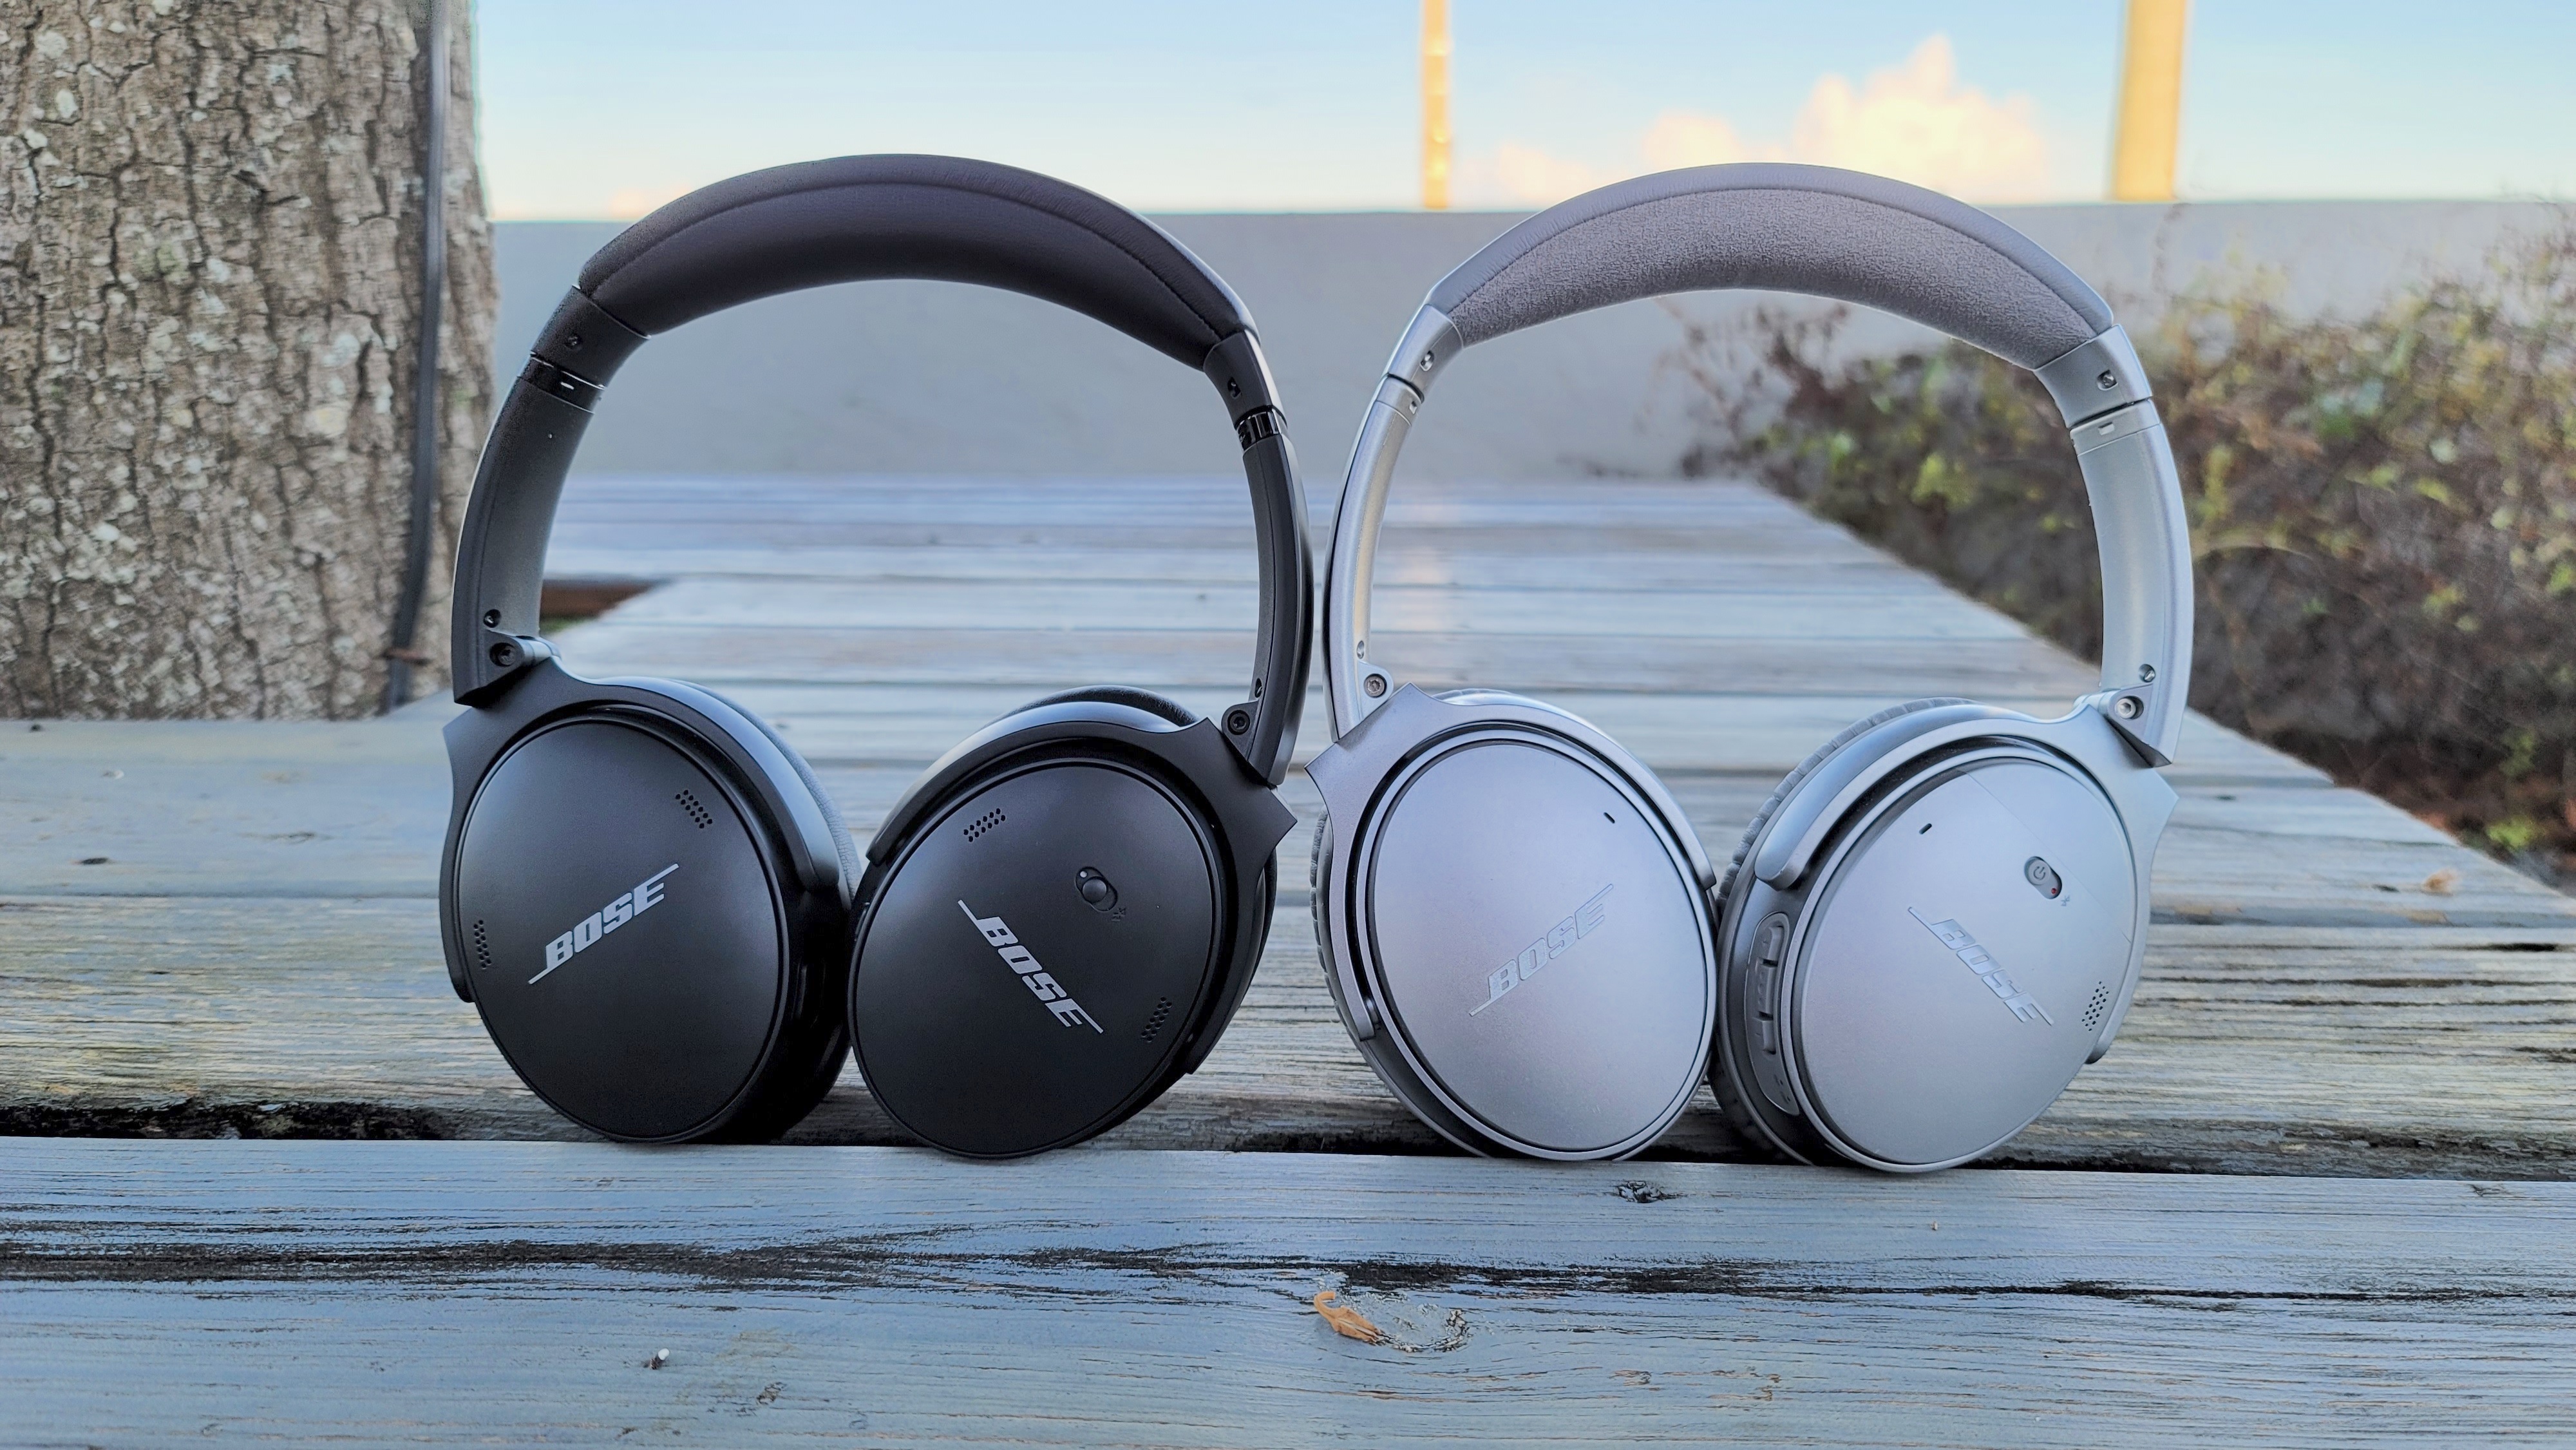 Bose QuietComfort 45 Bose QuietComfort 35 II: Which Bose noise-cancelling headphones are better? | Laptop Mag